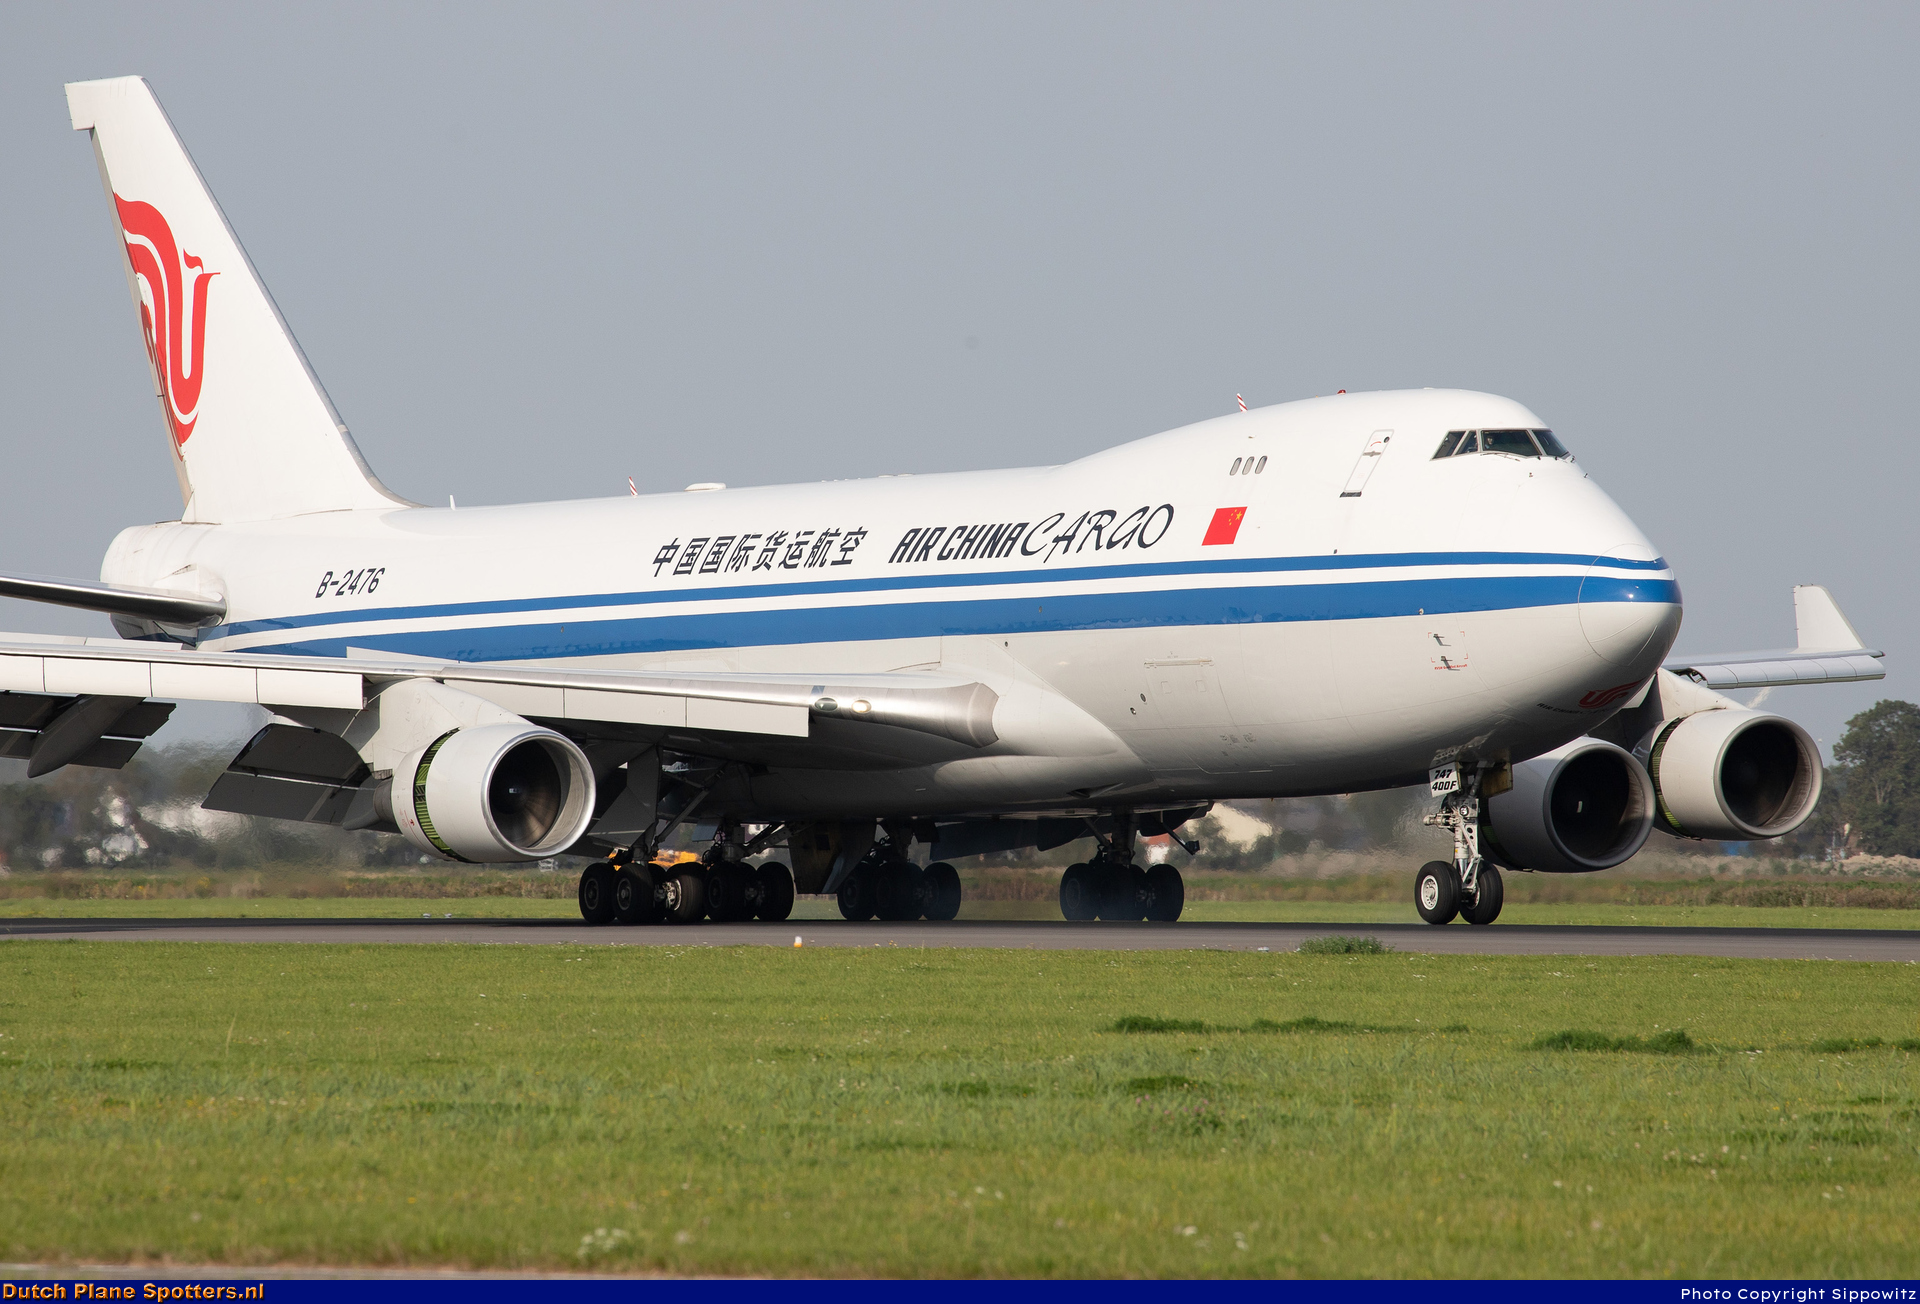 B-2476 Boeing 747-400 Air China Cargo by Sippowitz